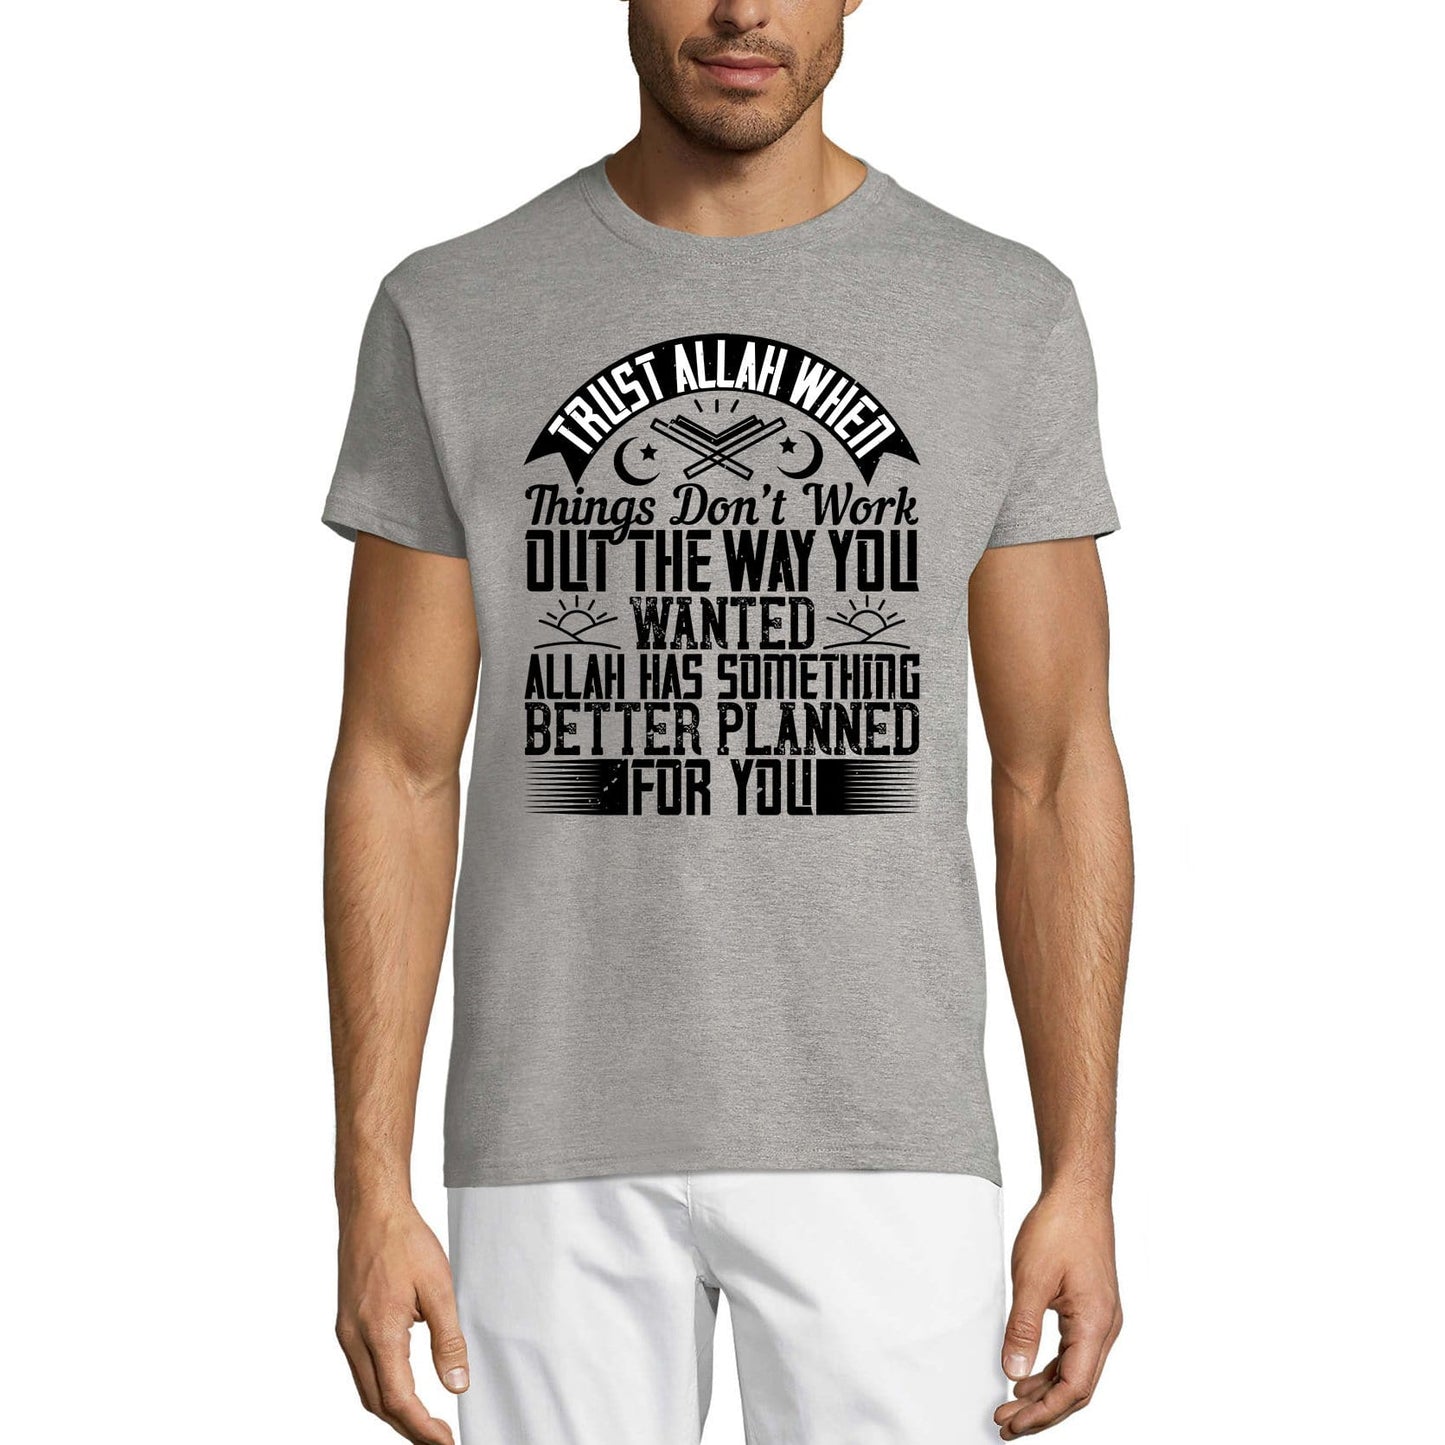 ULTRABASIC Men's T-Shirt Trust Allah When Things Don't Work - Religious Quote